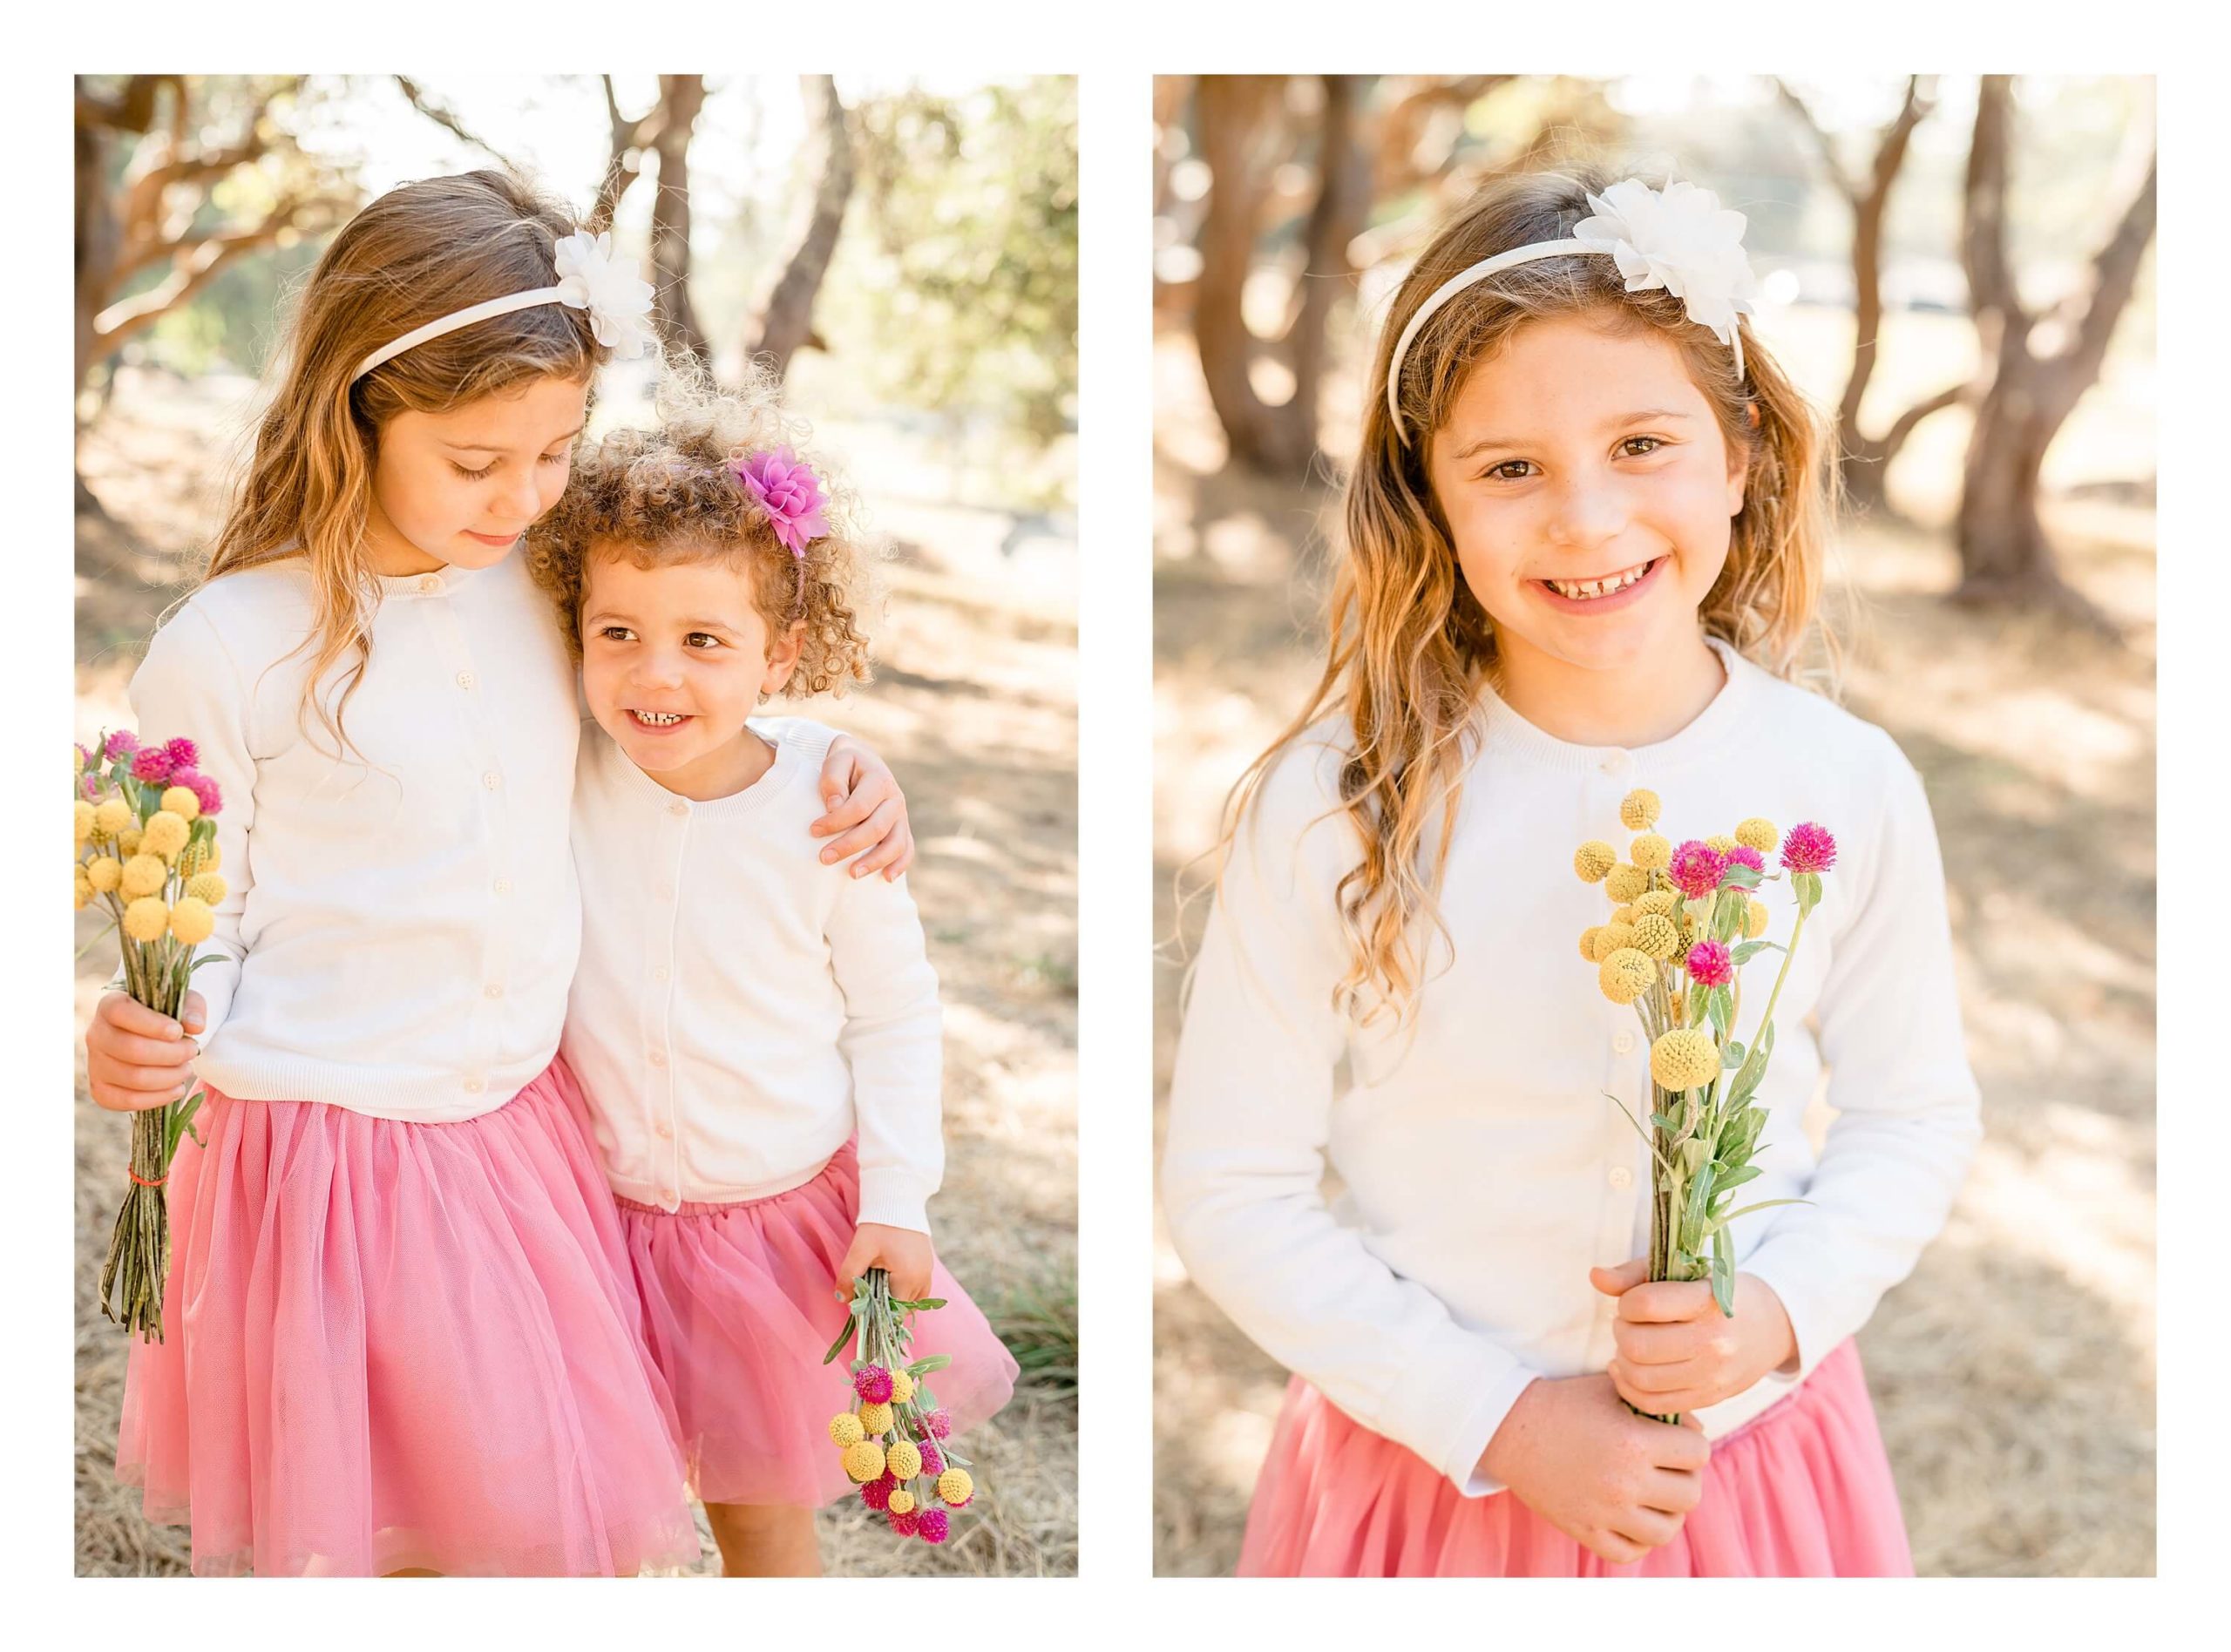 Two sisters wearing flower headbands hug each other. They are wearing pink tutus and holding bouncy bouquets. Right: A young girl smiles for the camera. She is wearing a white flower headband and holding a small bunch of flowers that compliment her pink tutu.